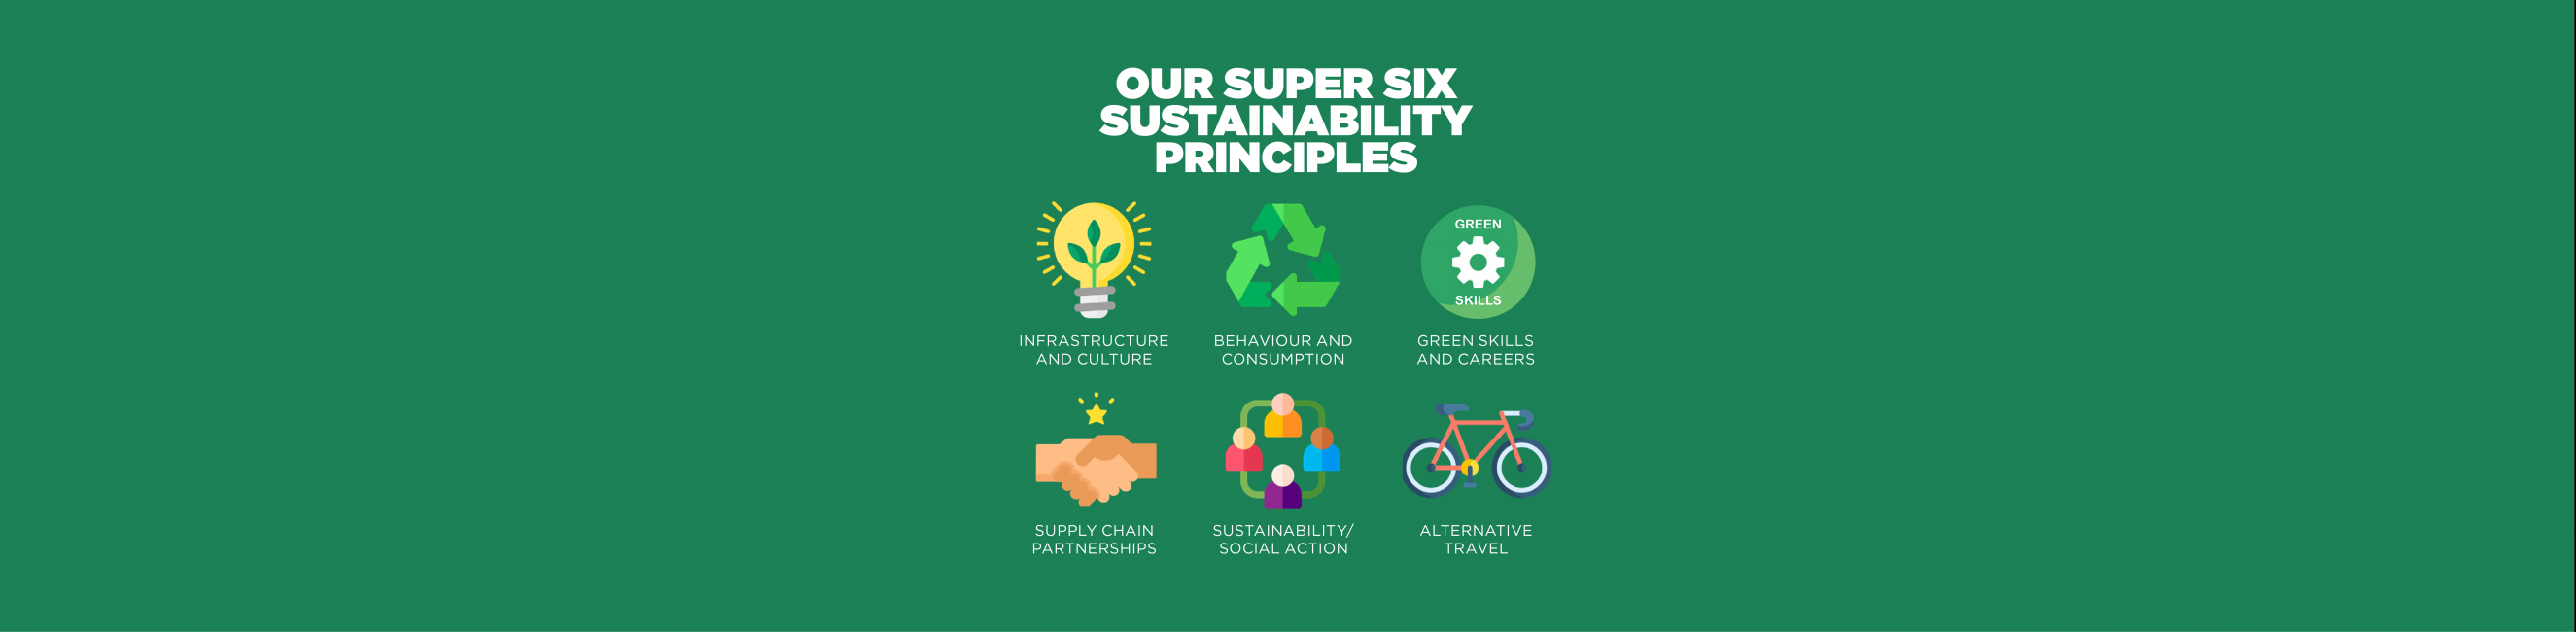 decorative green header displaying the super six sustainability principles 